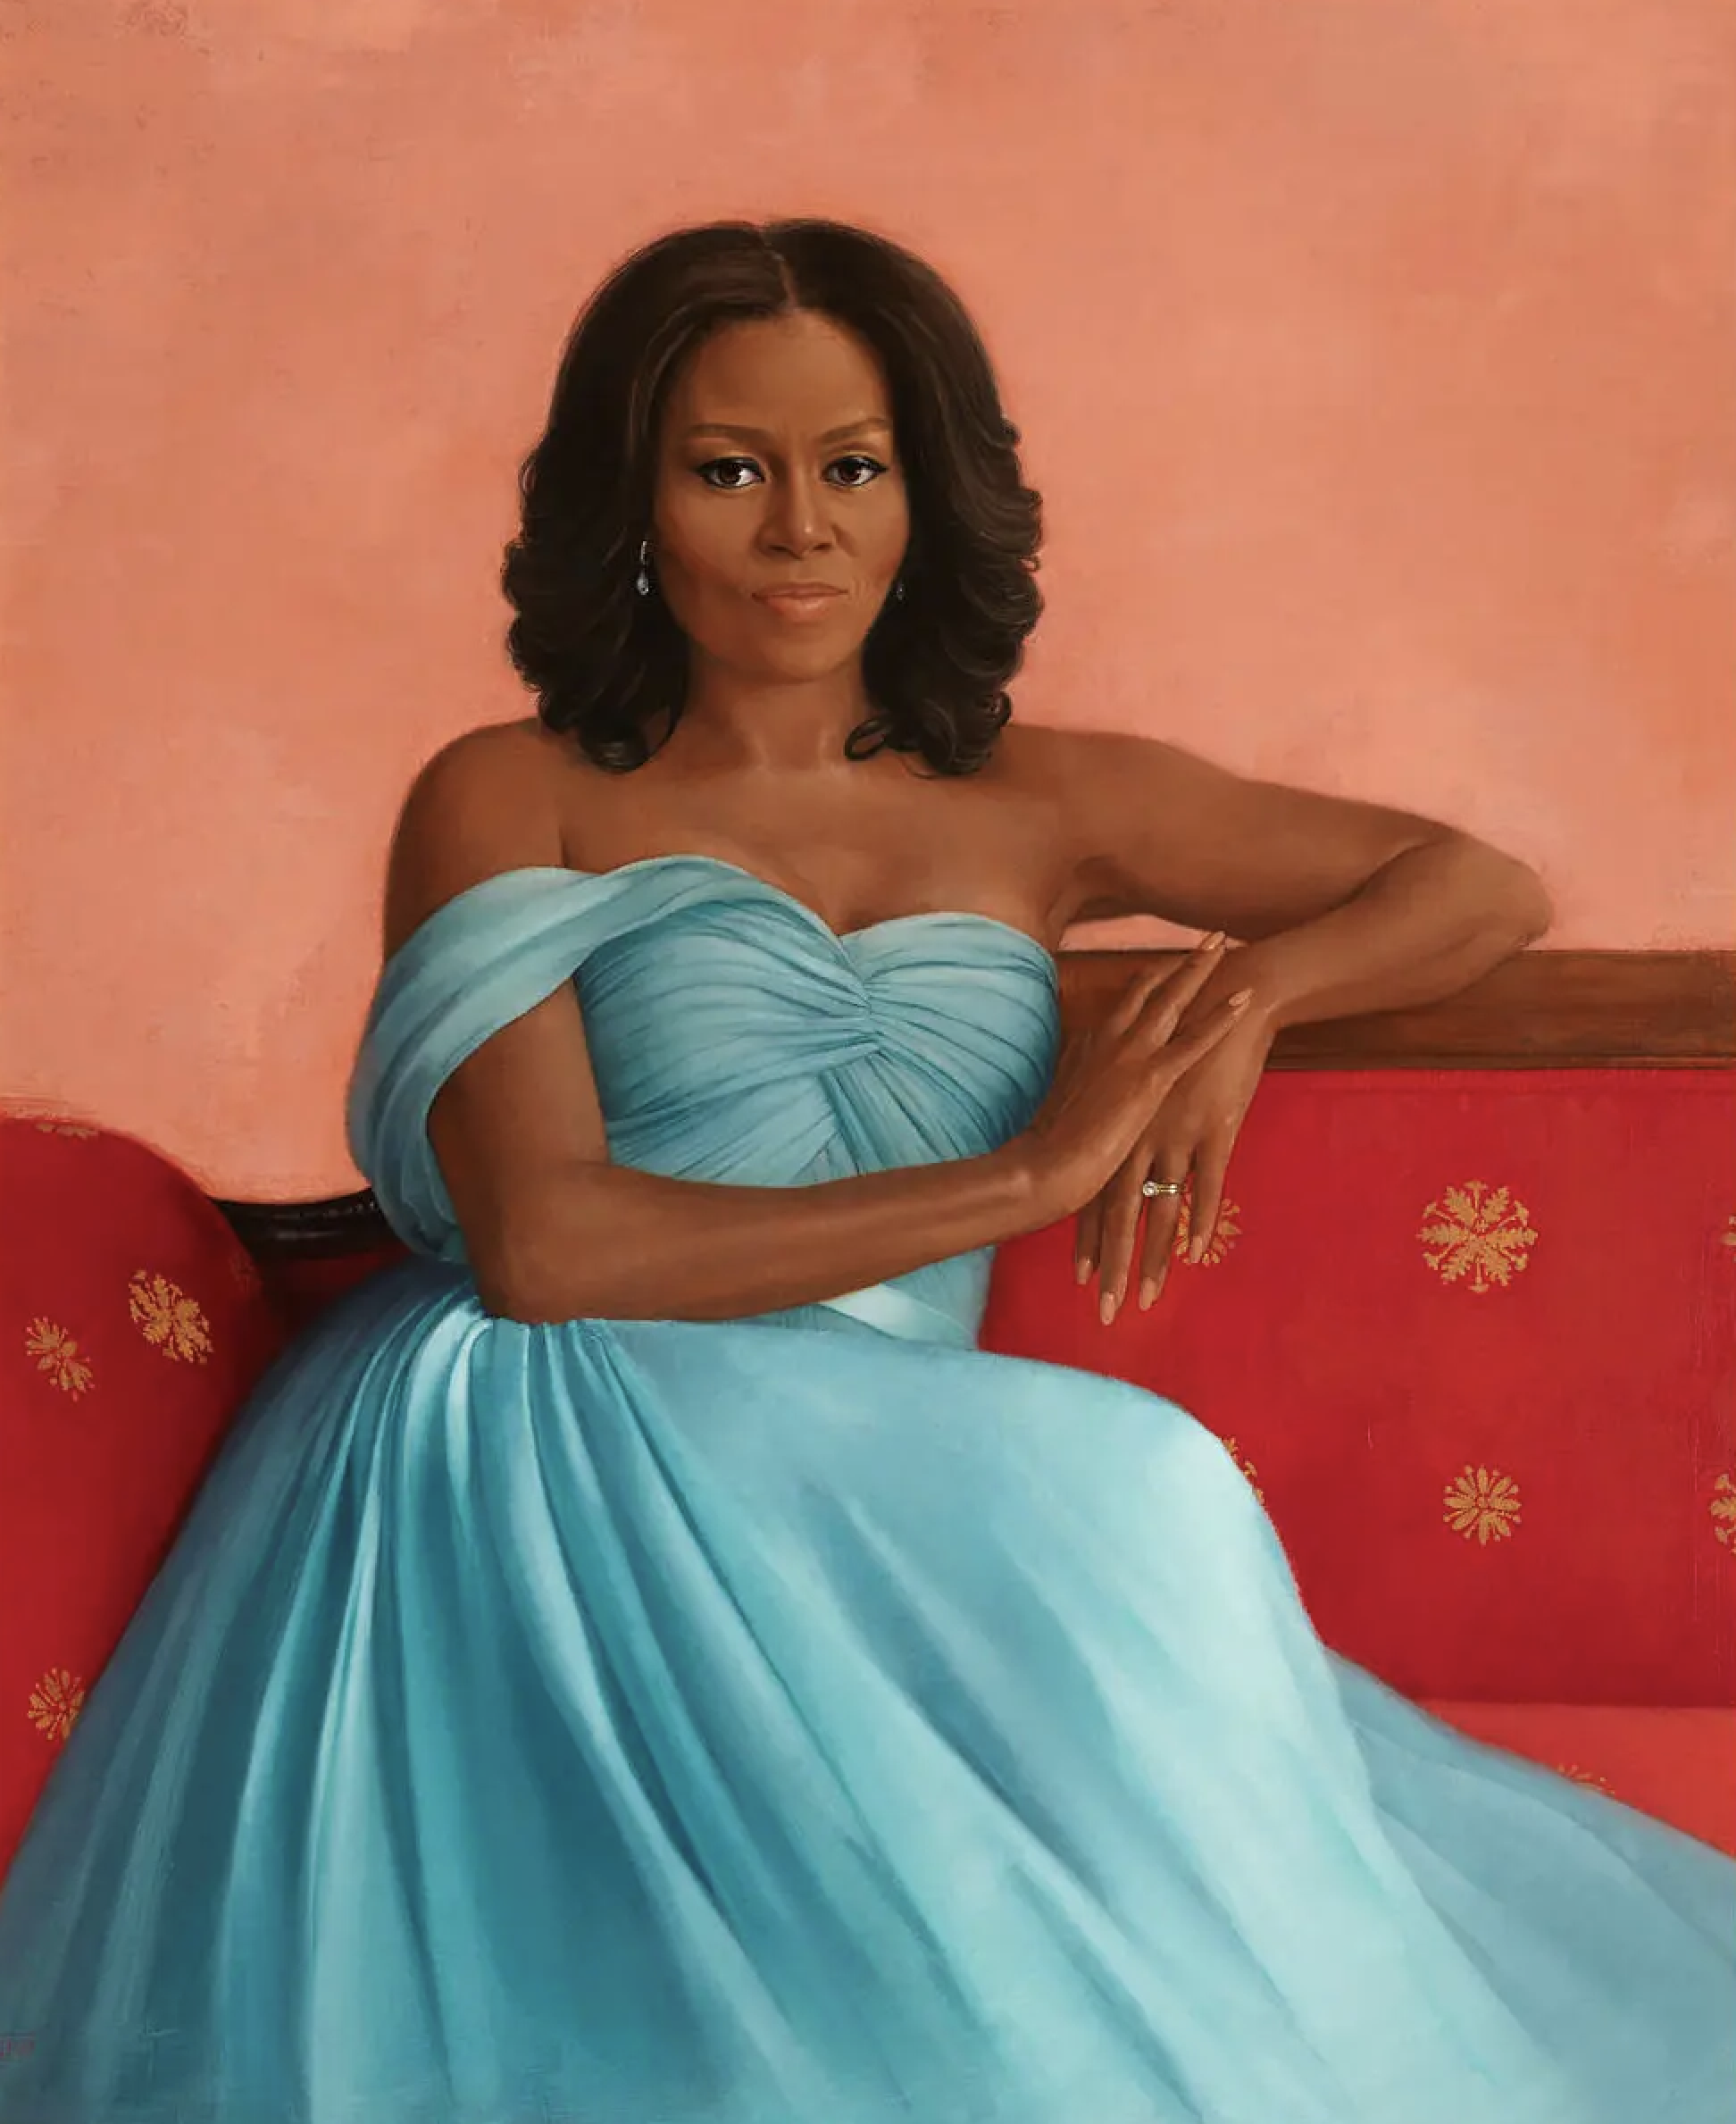 The official portrait of first lady Michelle Obama painted by Sharon Sprung.